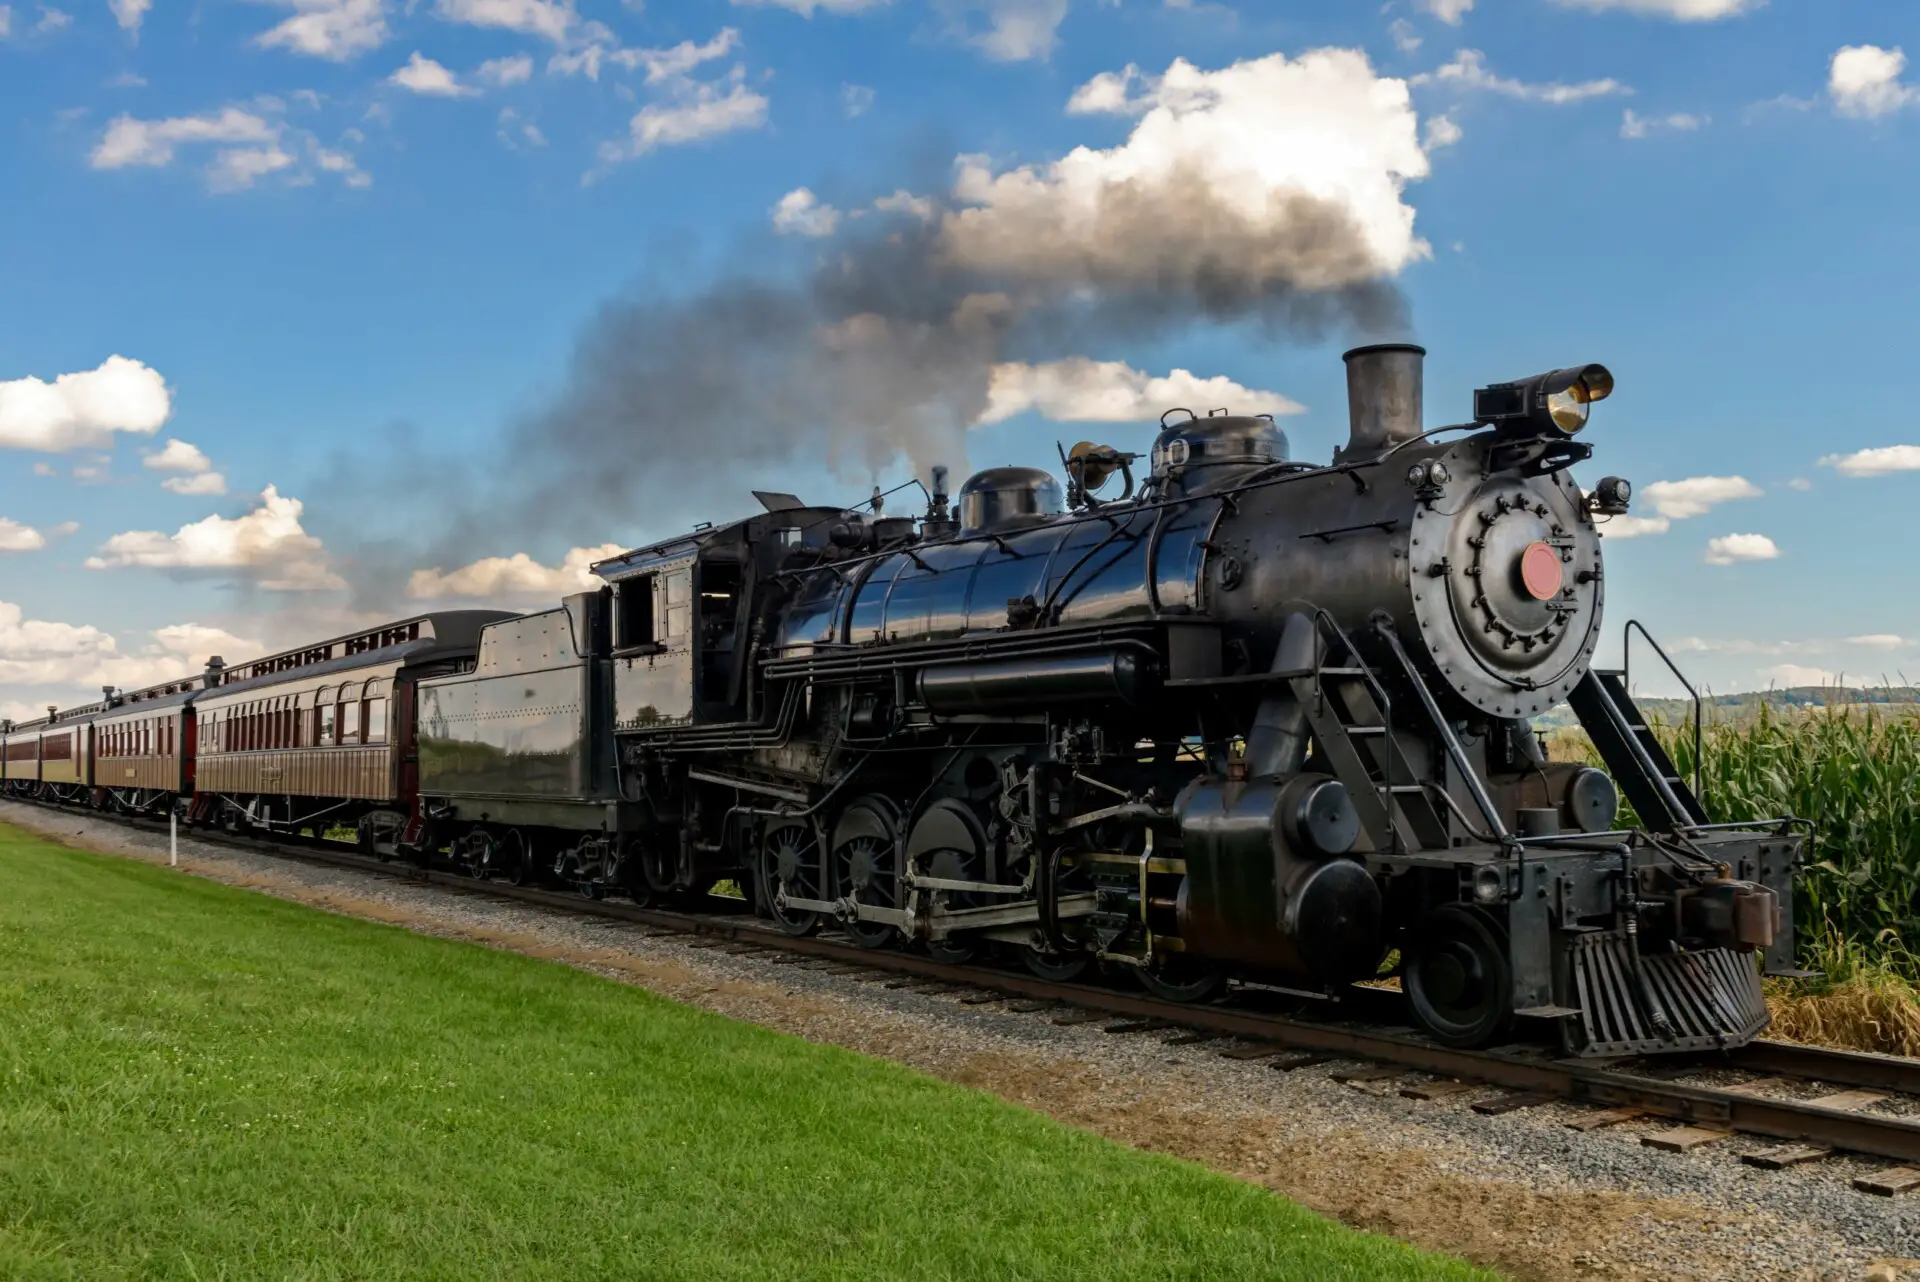 Are Steam Trains Bad for the Environment? 5 Quick Facts